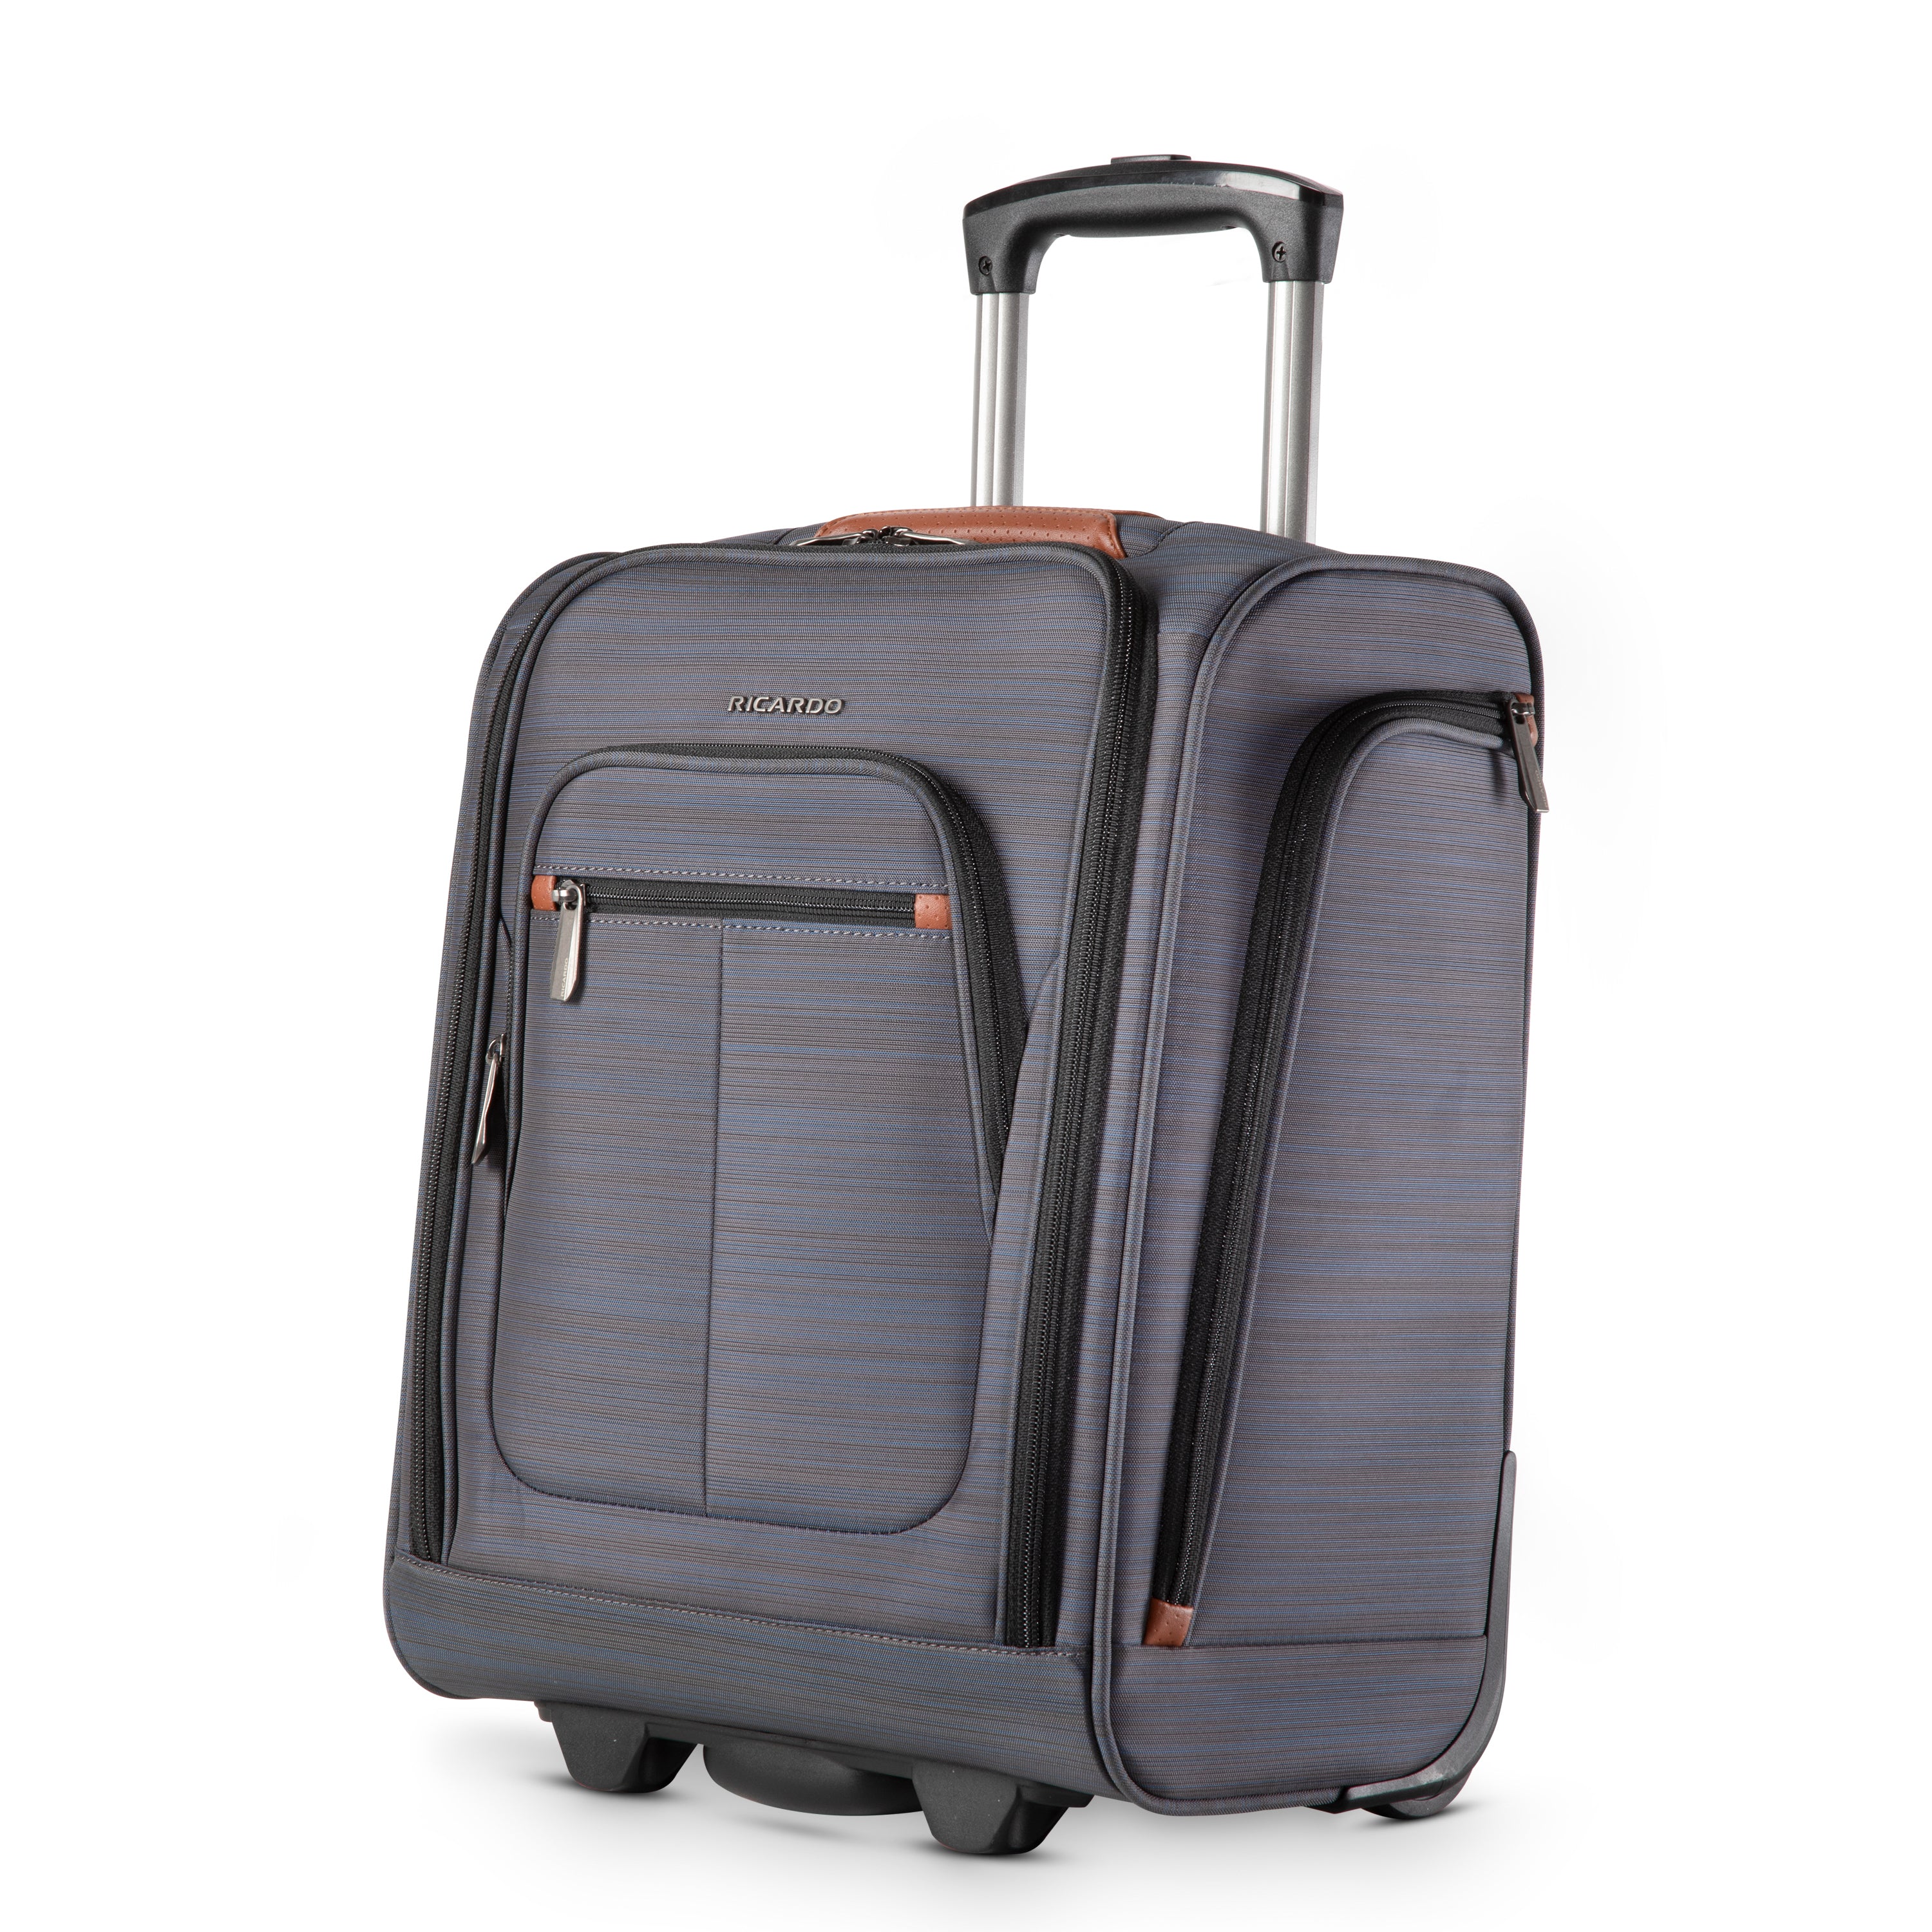 12% OFF on American Tourister Small (Below 60 Cm) 4 Wheel Soft Black Crete Luggage  Trolley on Snapdeal | PaisaWapas.com